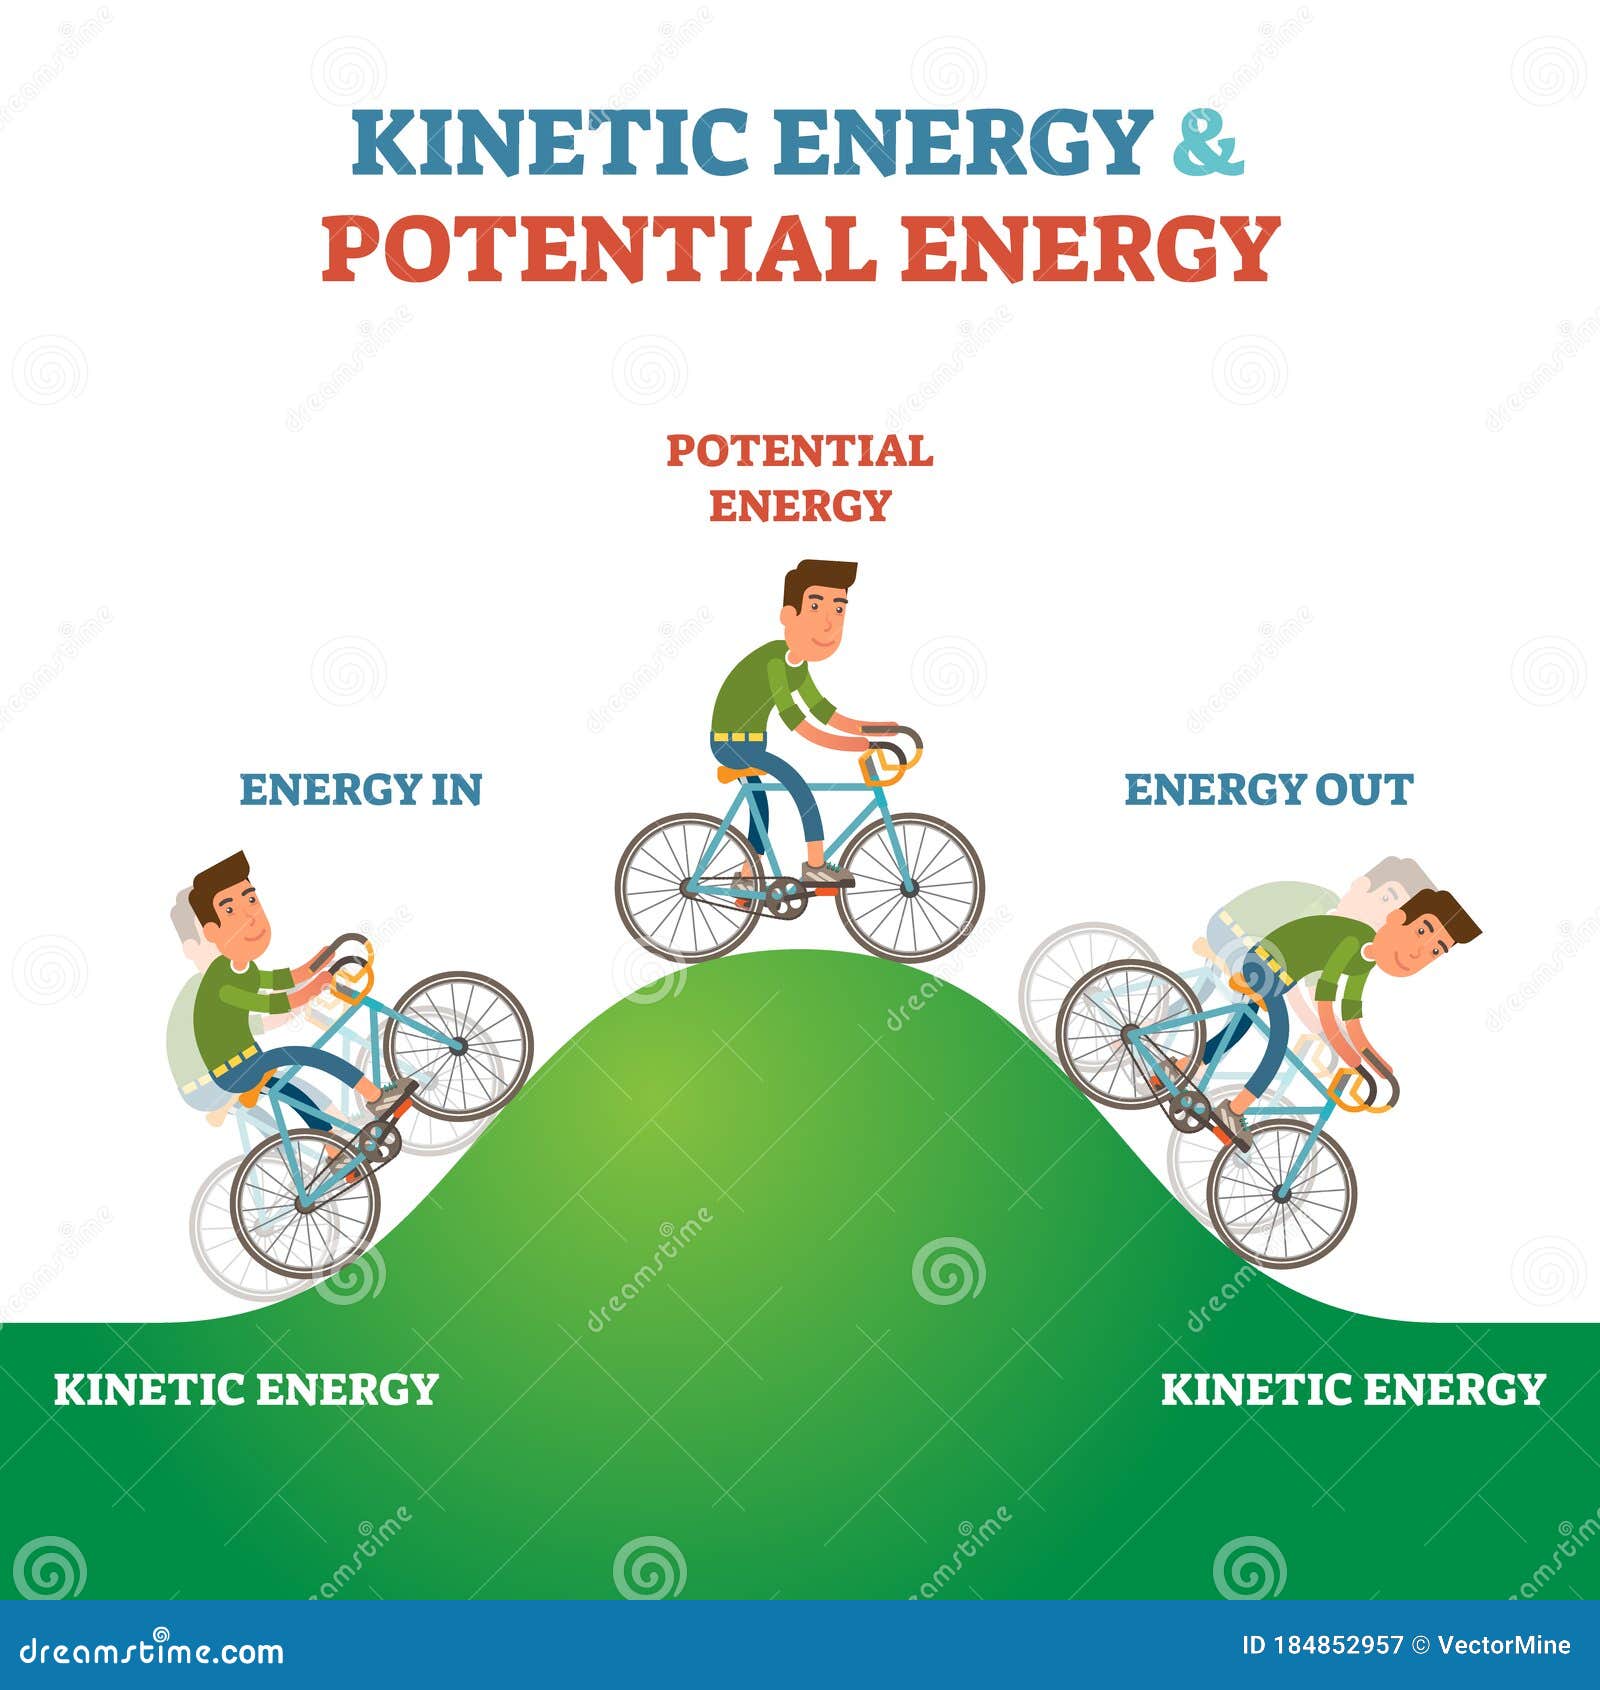 Pictures Of Kinetic Energy And Potential Energy